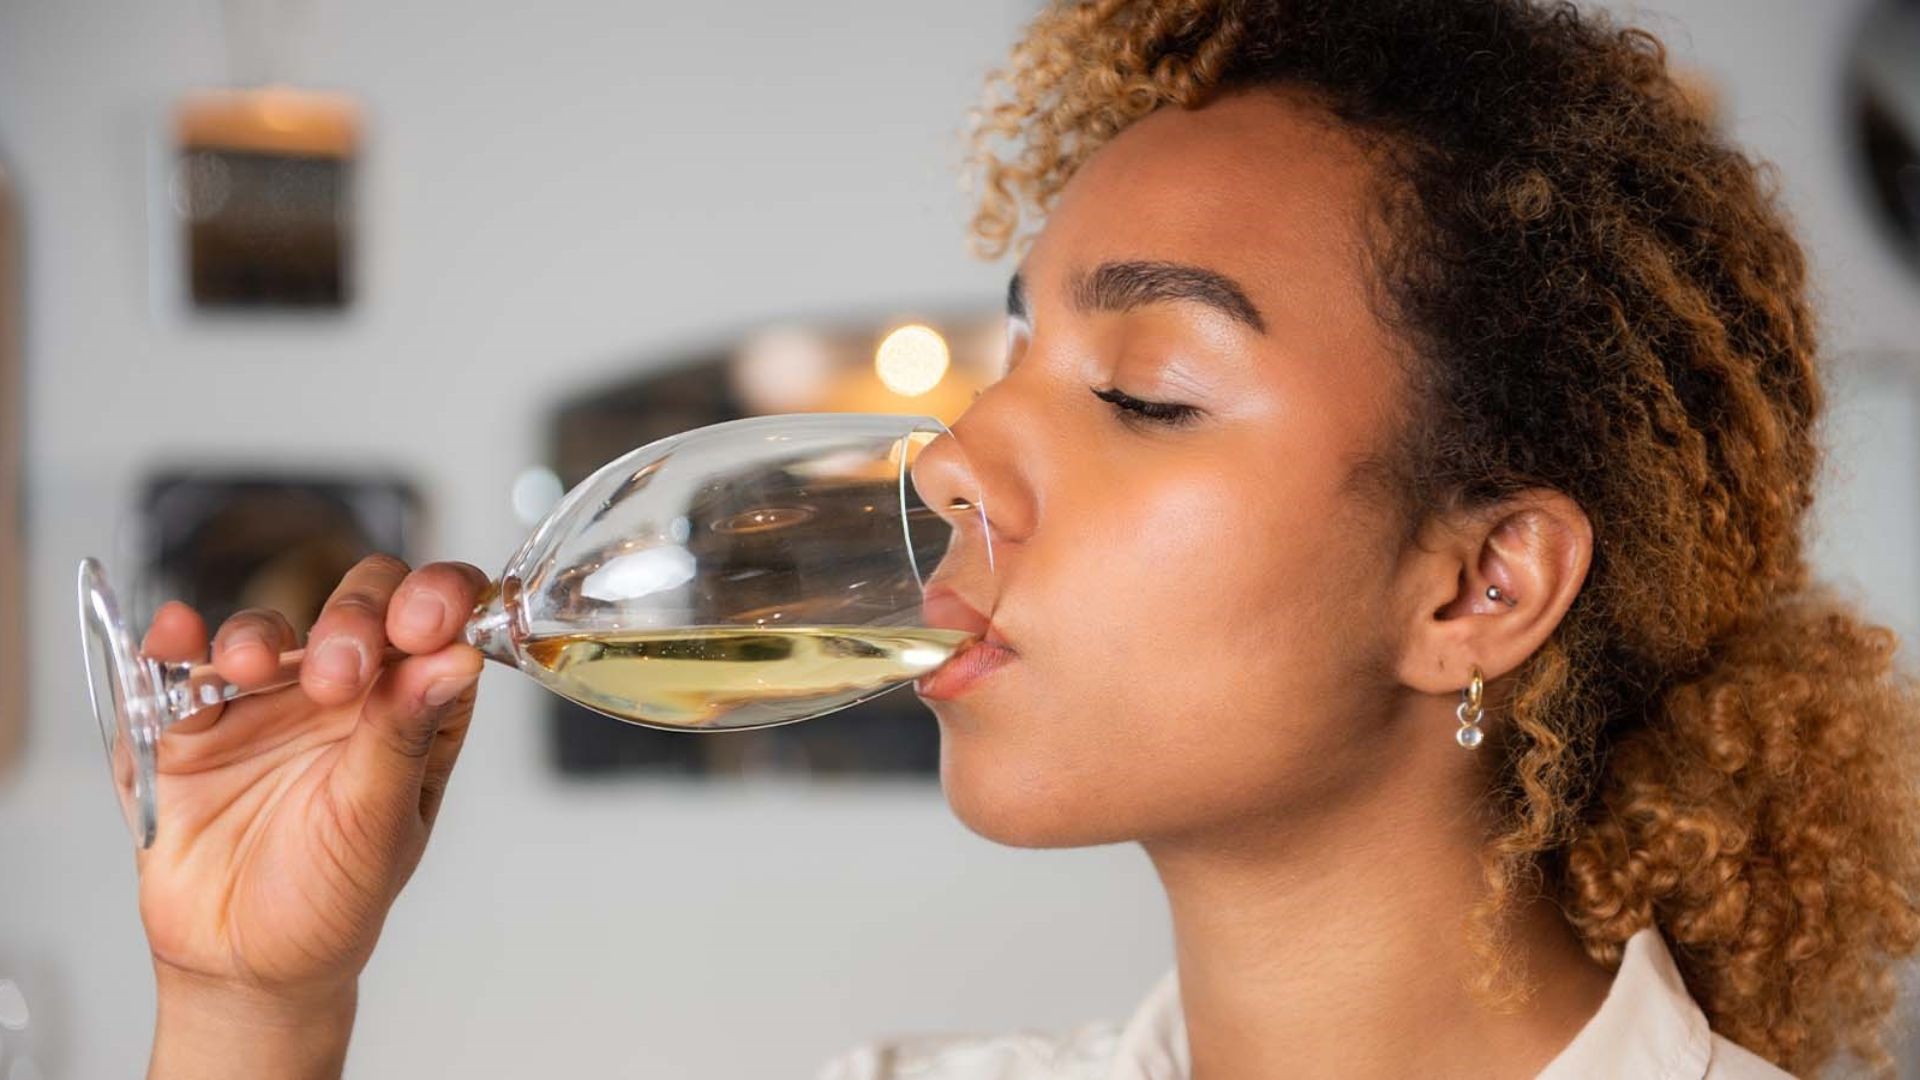 a lady drinking wine showing the basic wine taste